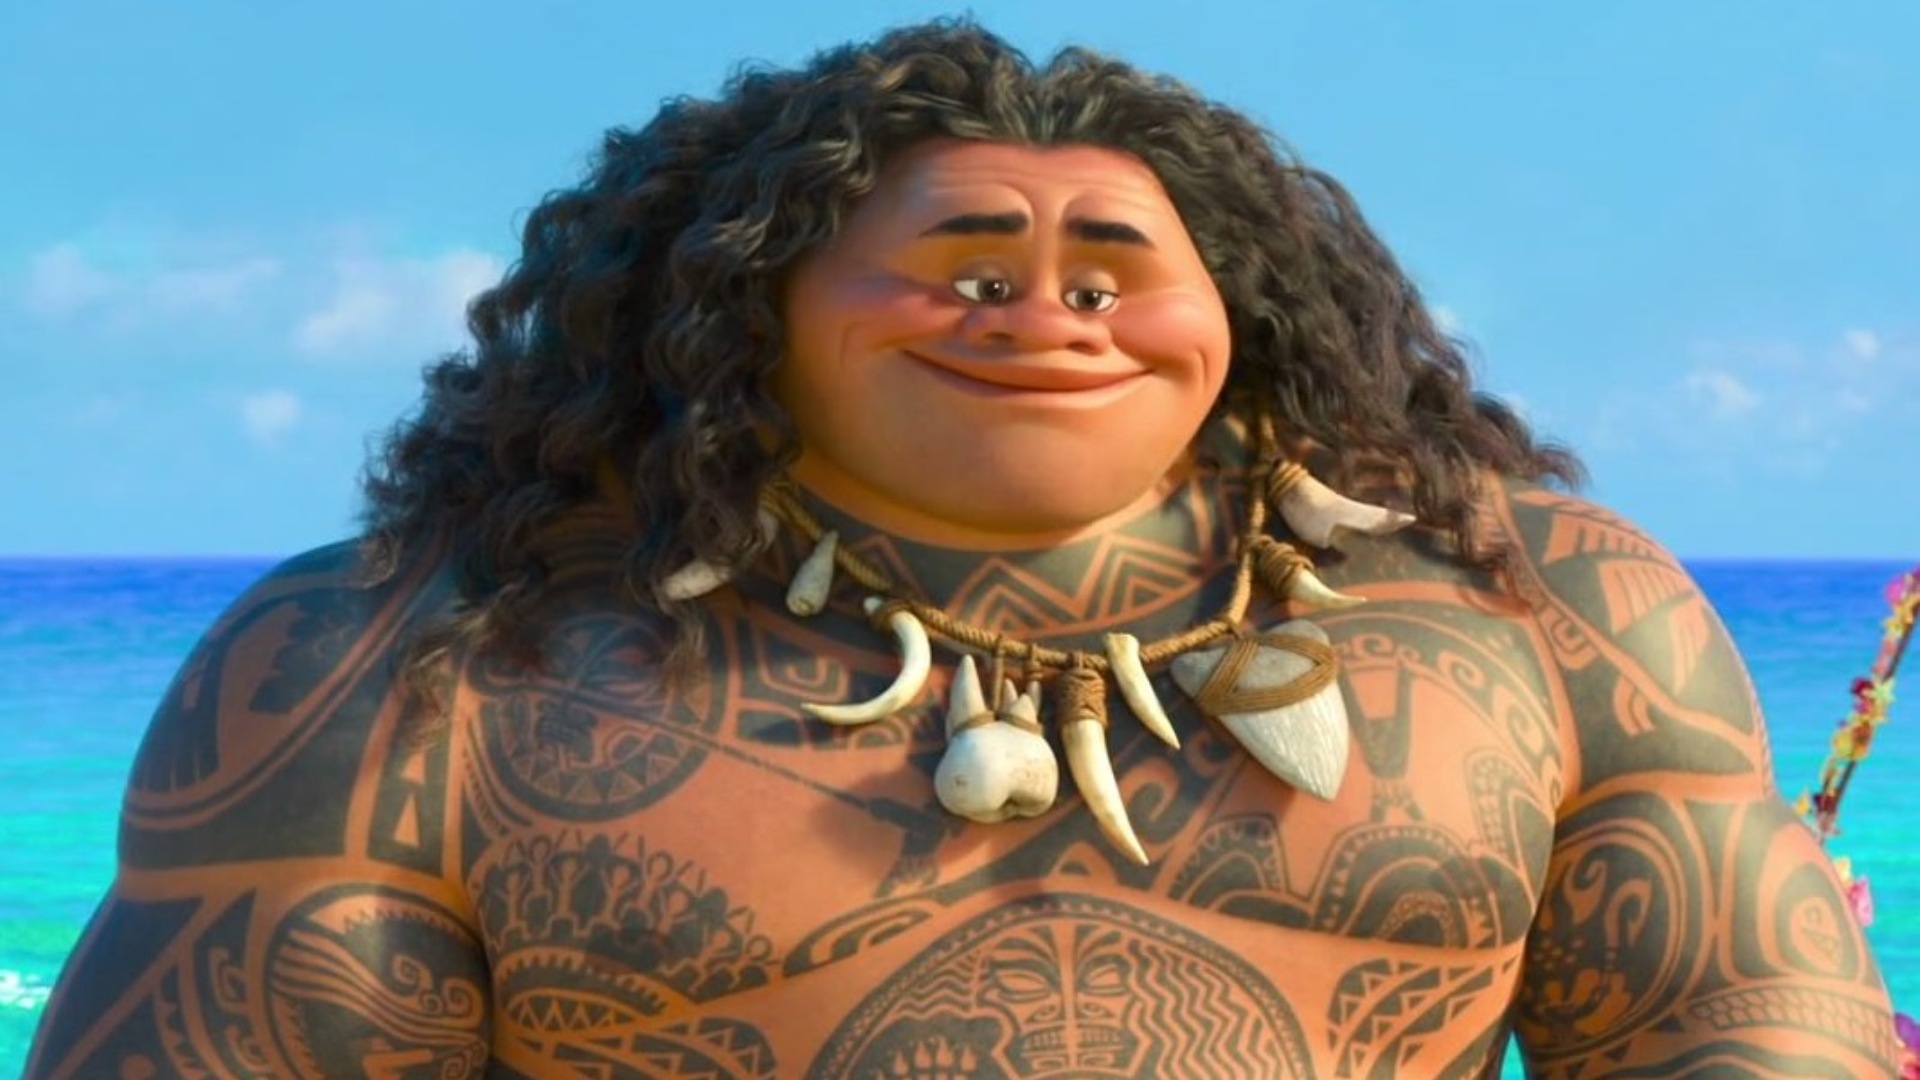 Maui doing the pec pop of love insane references